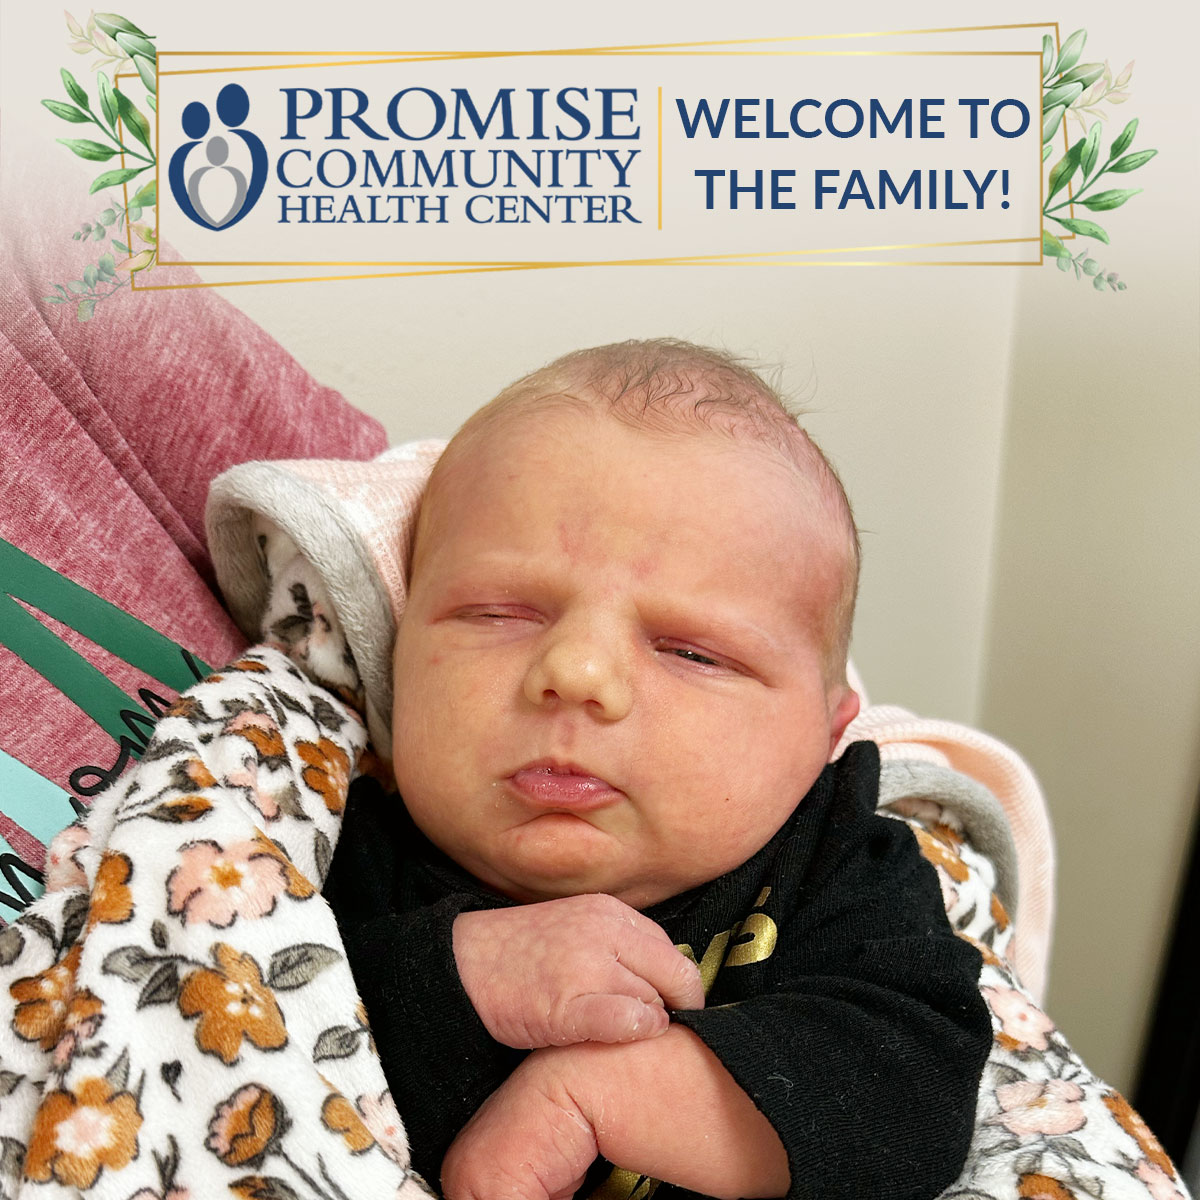 Home birth in Sheldon, Iowa | Promise Community Health Center in Sioux Center, Iowa | Midwives in northwest Iowa, Midwives in southeast South Dakota, Midwives in southwest Minnesota | Midwives in Sioux Falls South Dakota, Midwives in Beresford South Dakota, Midwives in Sioux City IA, Midwives in LeMars IA, Midwives in Worthington MN, Midwives in Iowa, Midwives in South Dakota, Midwives in Minnesota